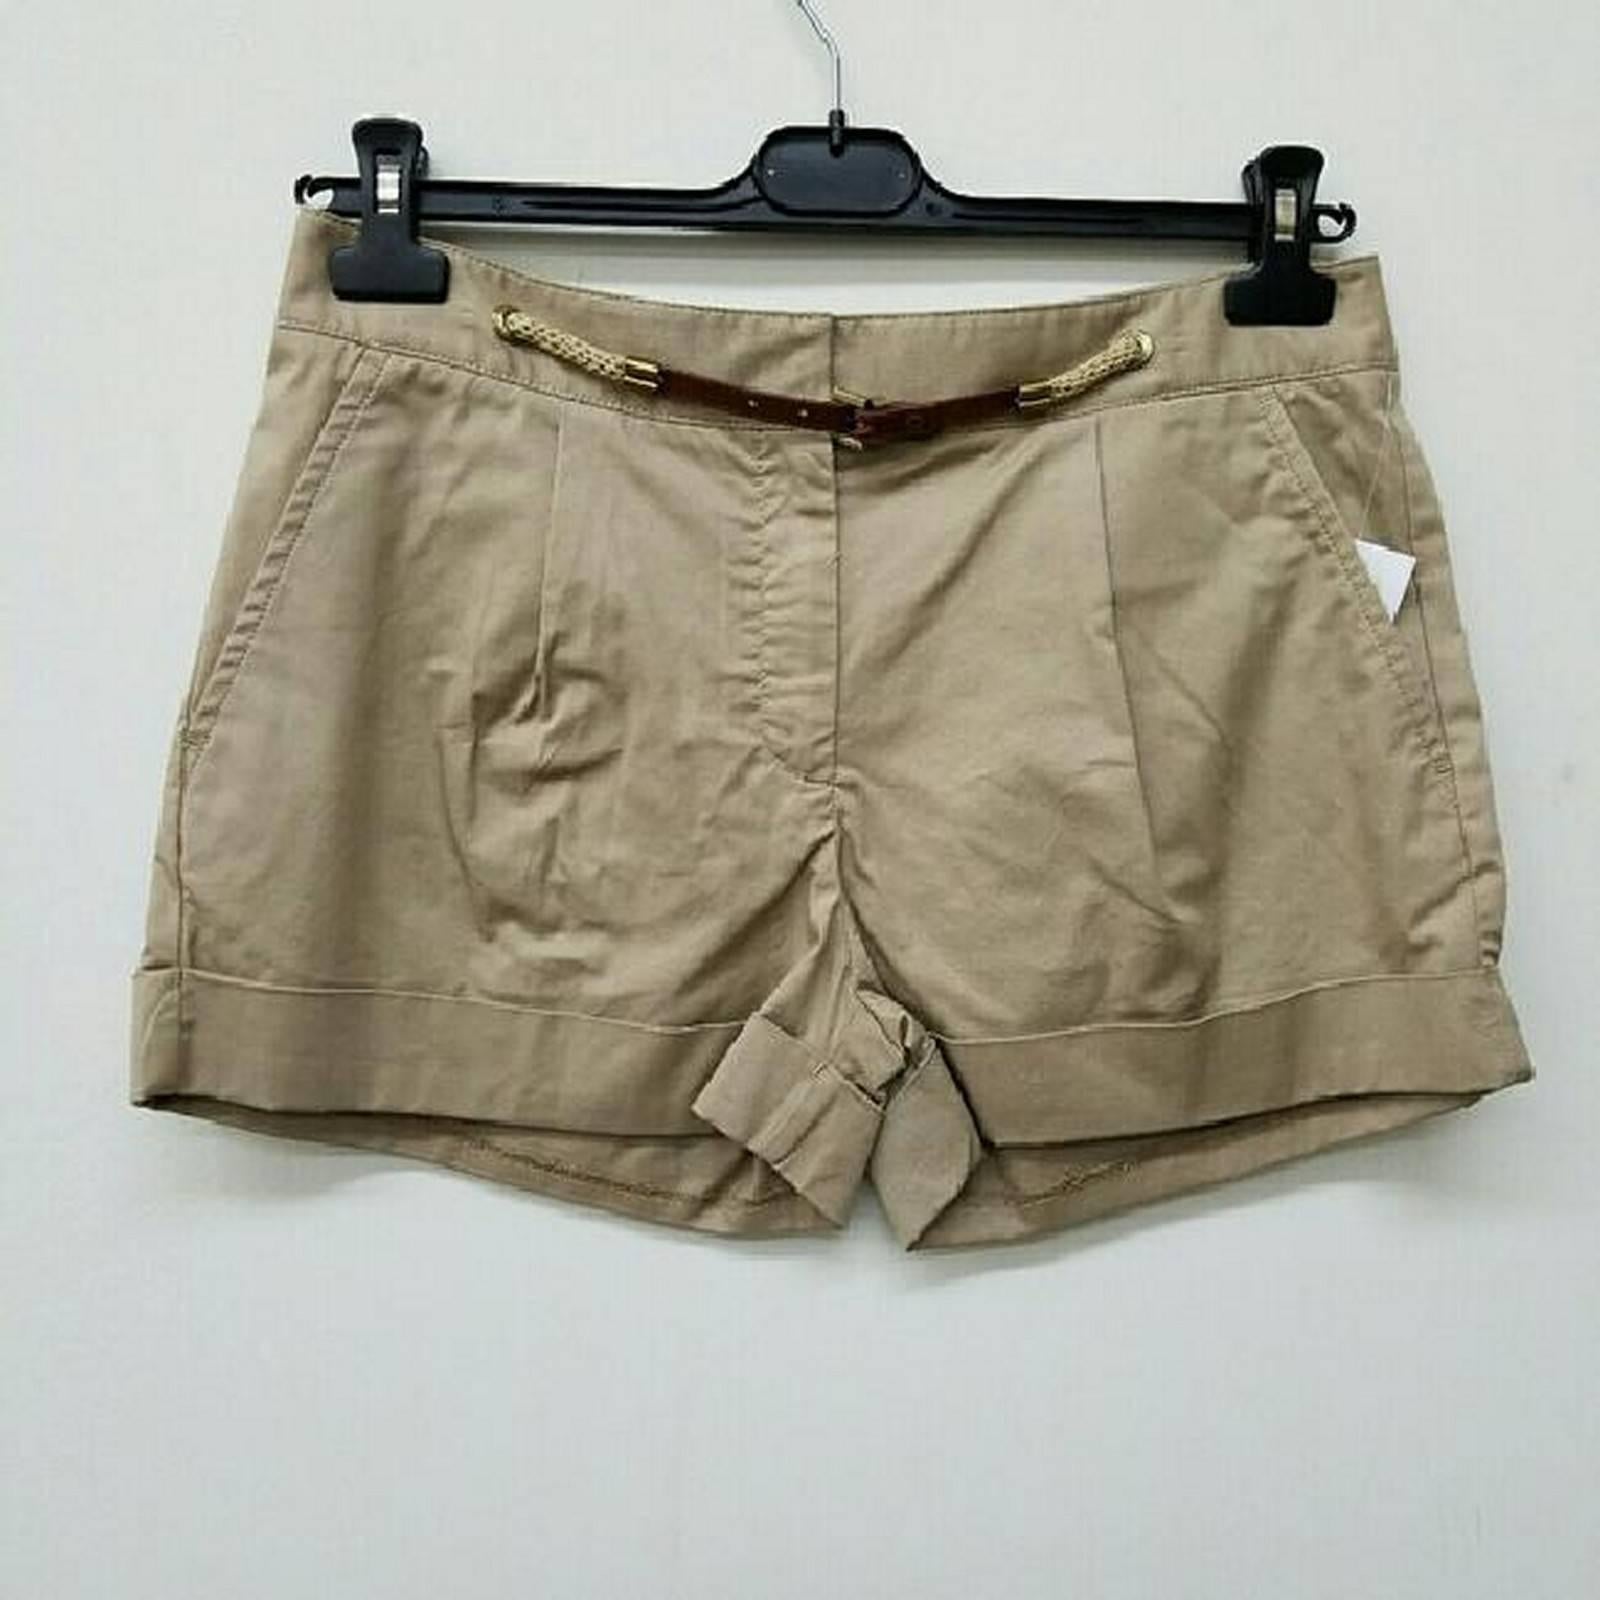 Michael Kors Shorts

Adjustable waist belt. Brand new. Never used. Tags still attached

Type:Shorts
Size:8 (M, 29, 30)
Color:tan
Brand:Michael Kors
Style/Collection:Michael Kors Shorts